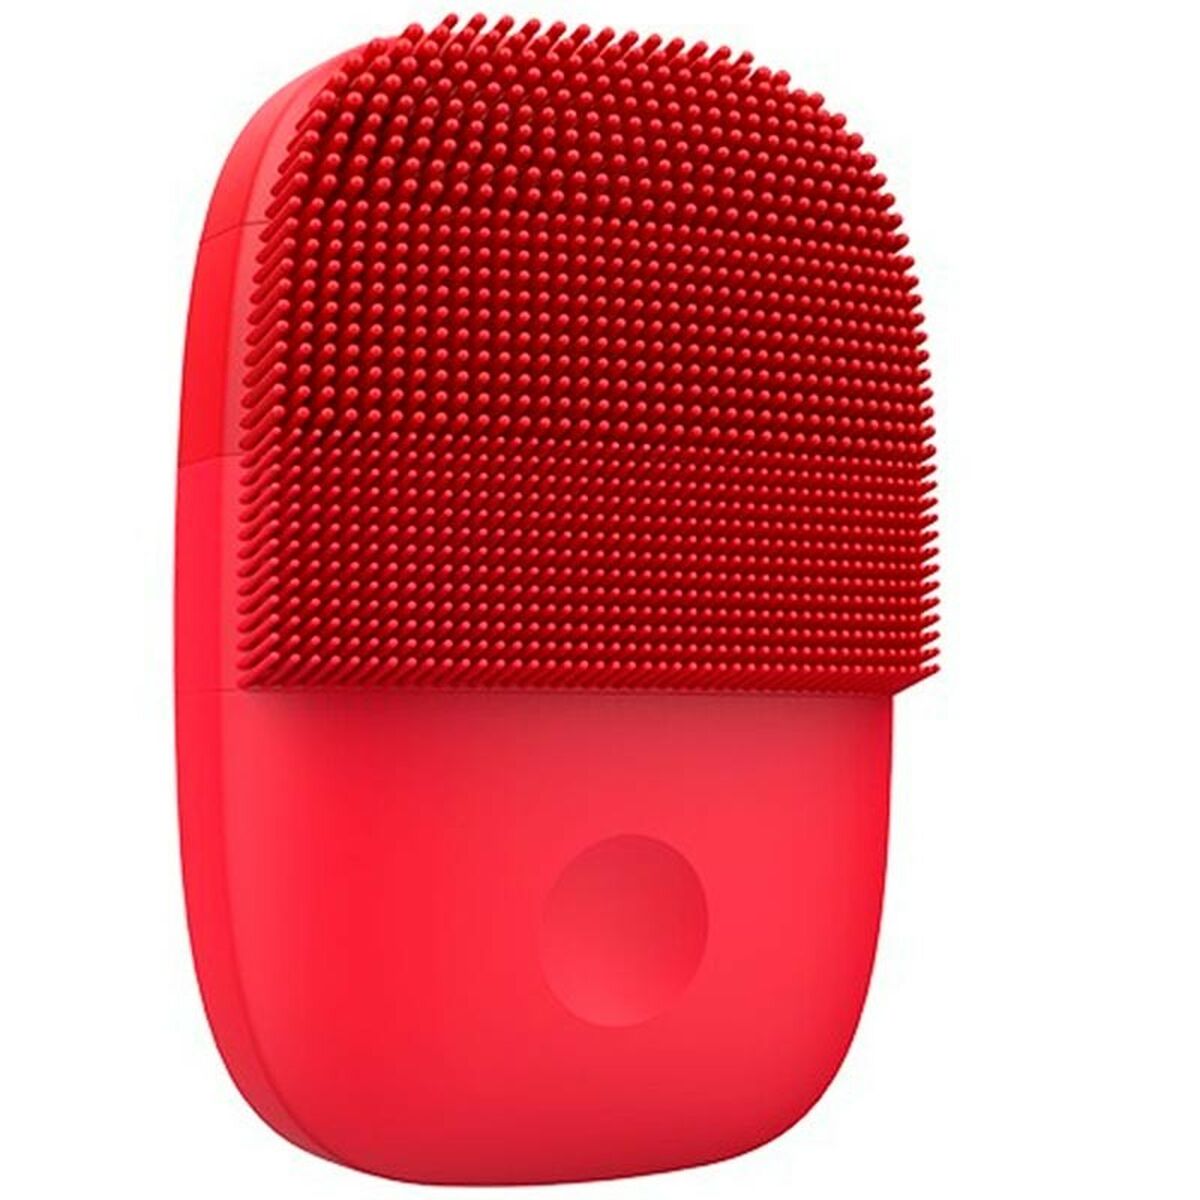 Facial cleansing brush Inface Sonic-0